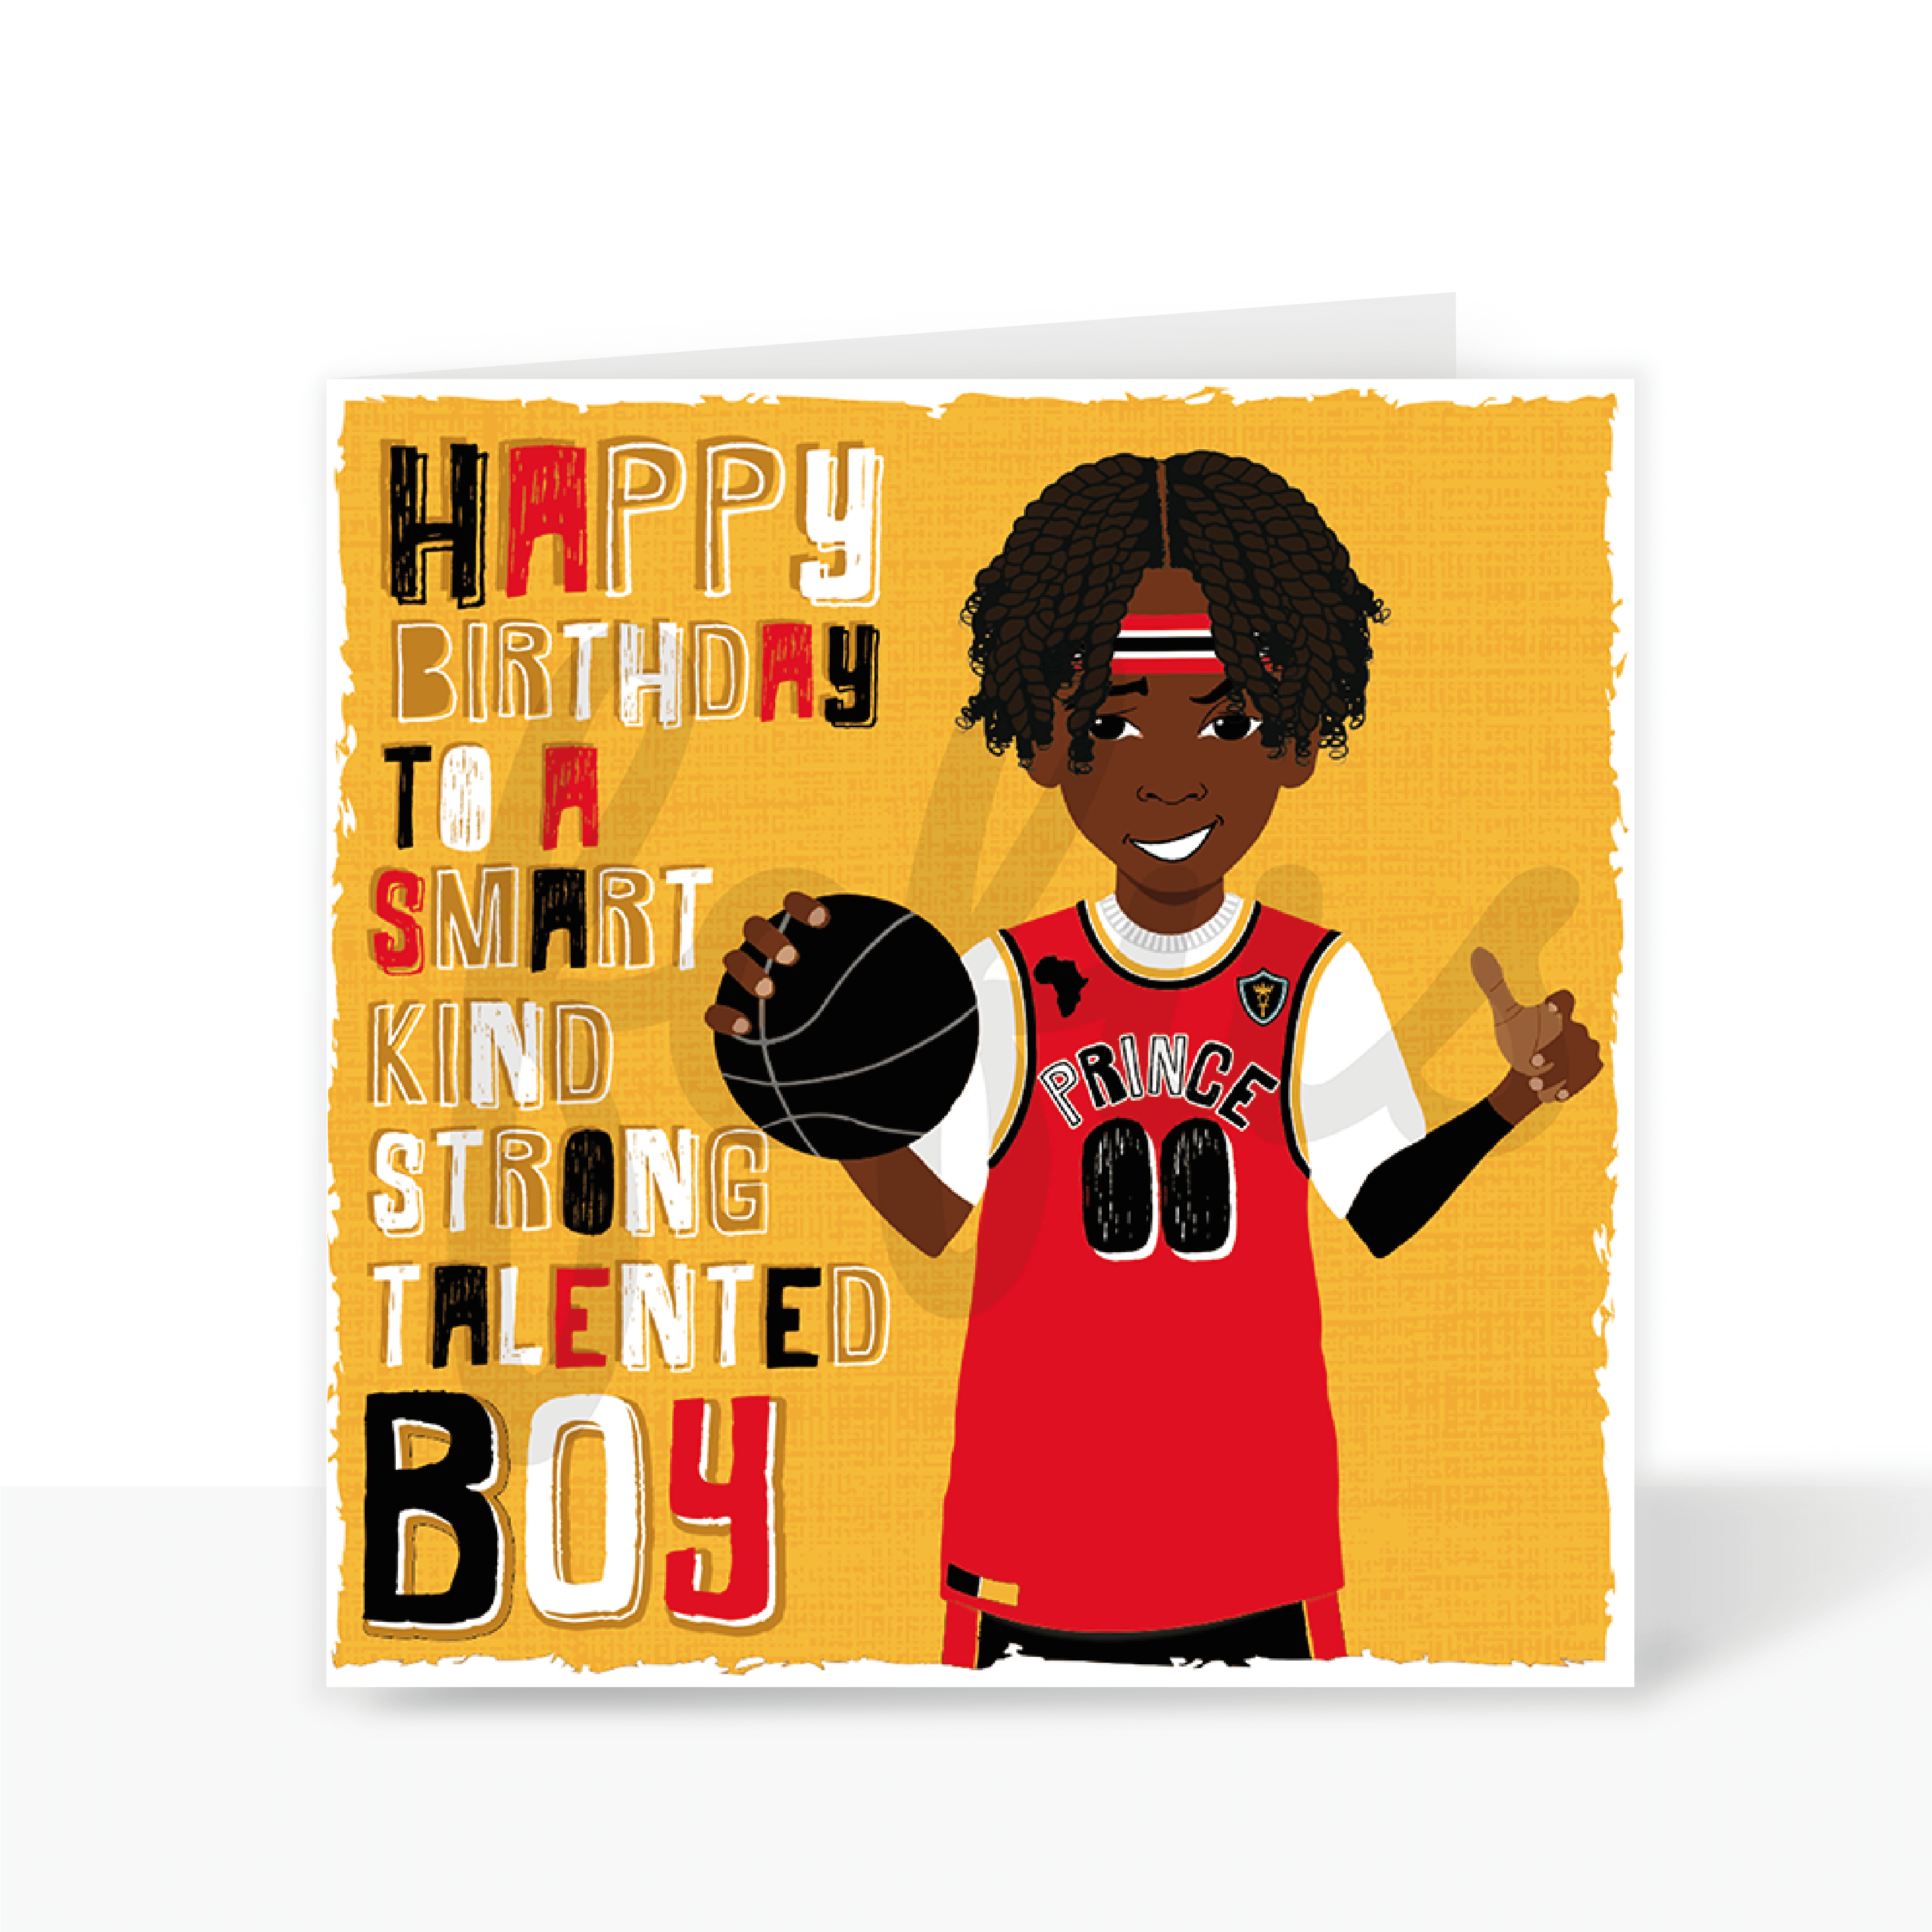 A birthday card featuring a Black boy holding a basketball against a yellow background. He is wearing a red basketball uniform. 